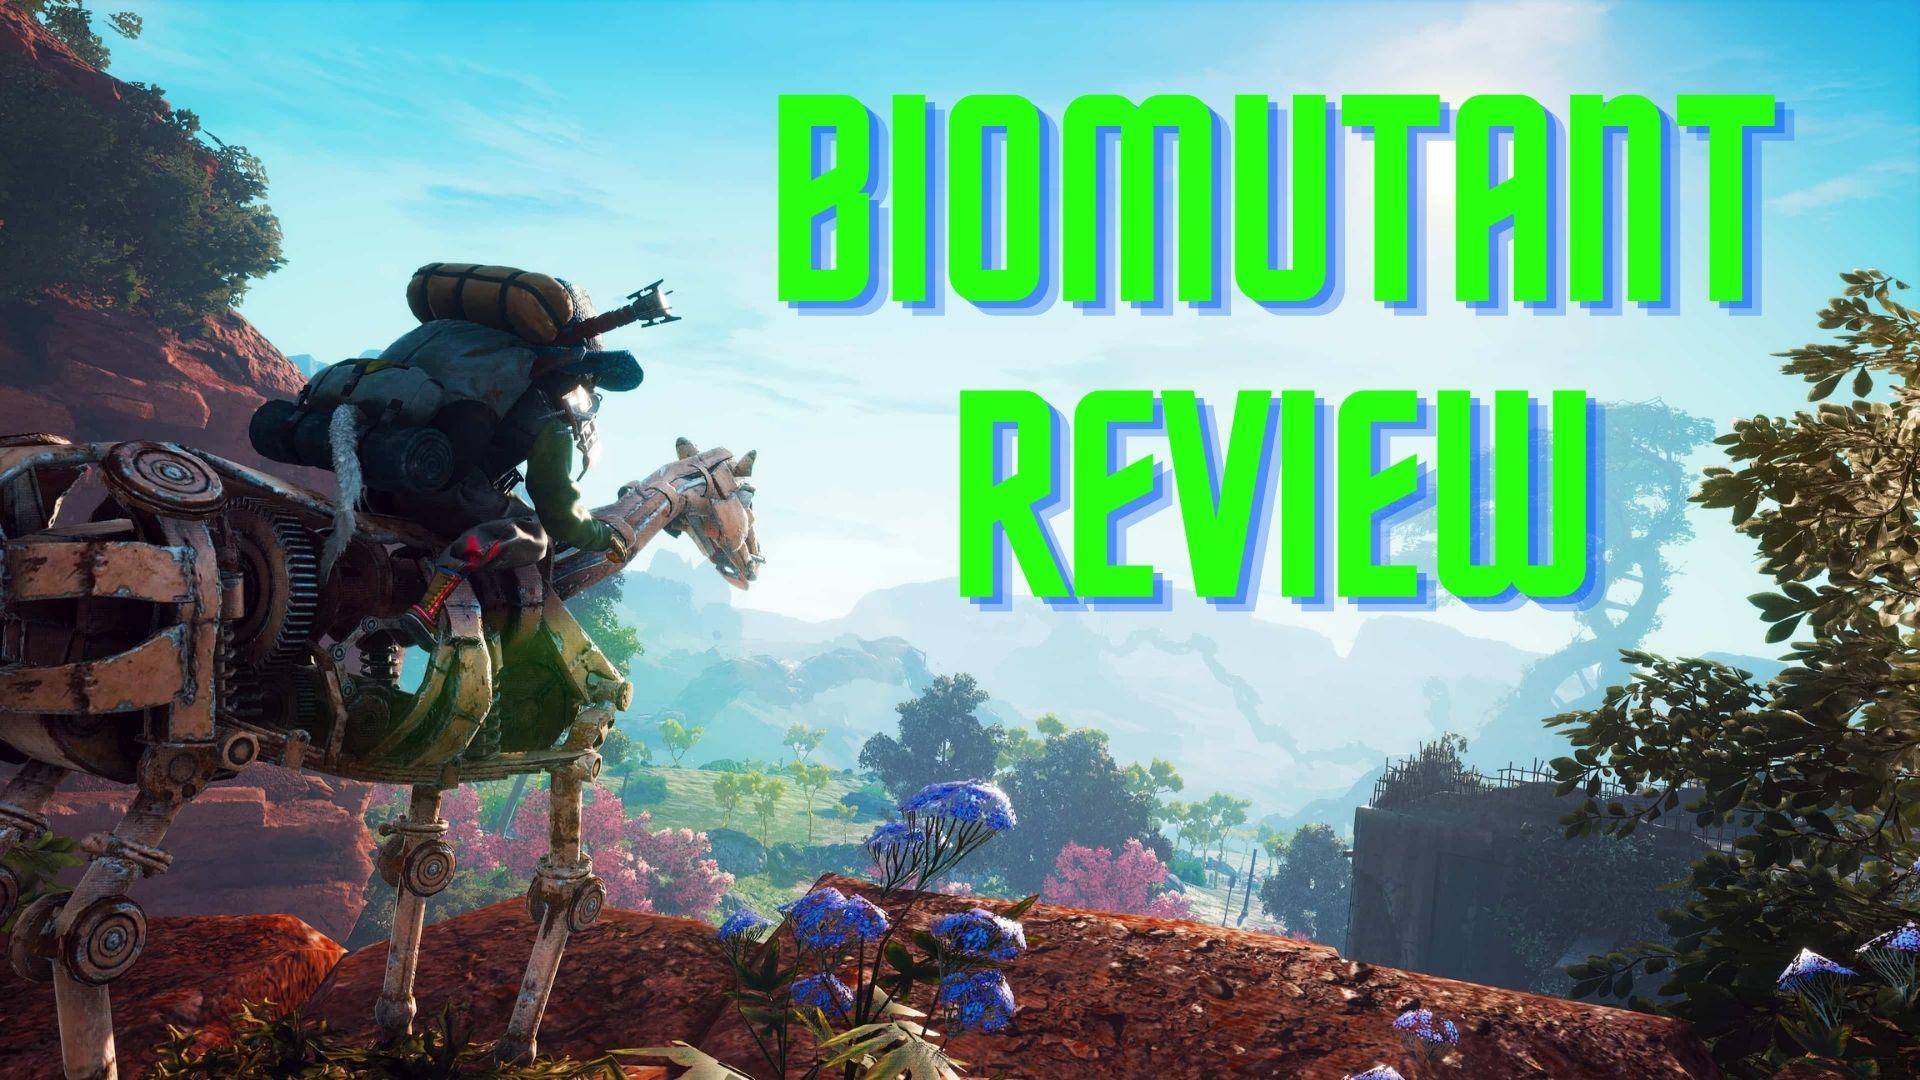 Biomutant Review: A Bizarre, Yet Charming Adventure in a Beautiful World [SPOILER FREE]